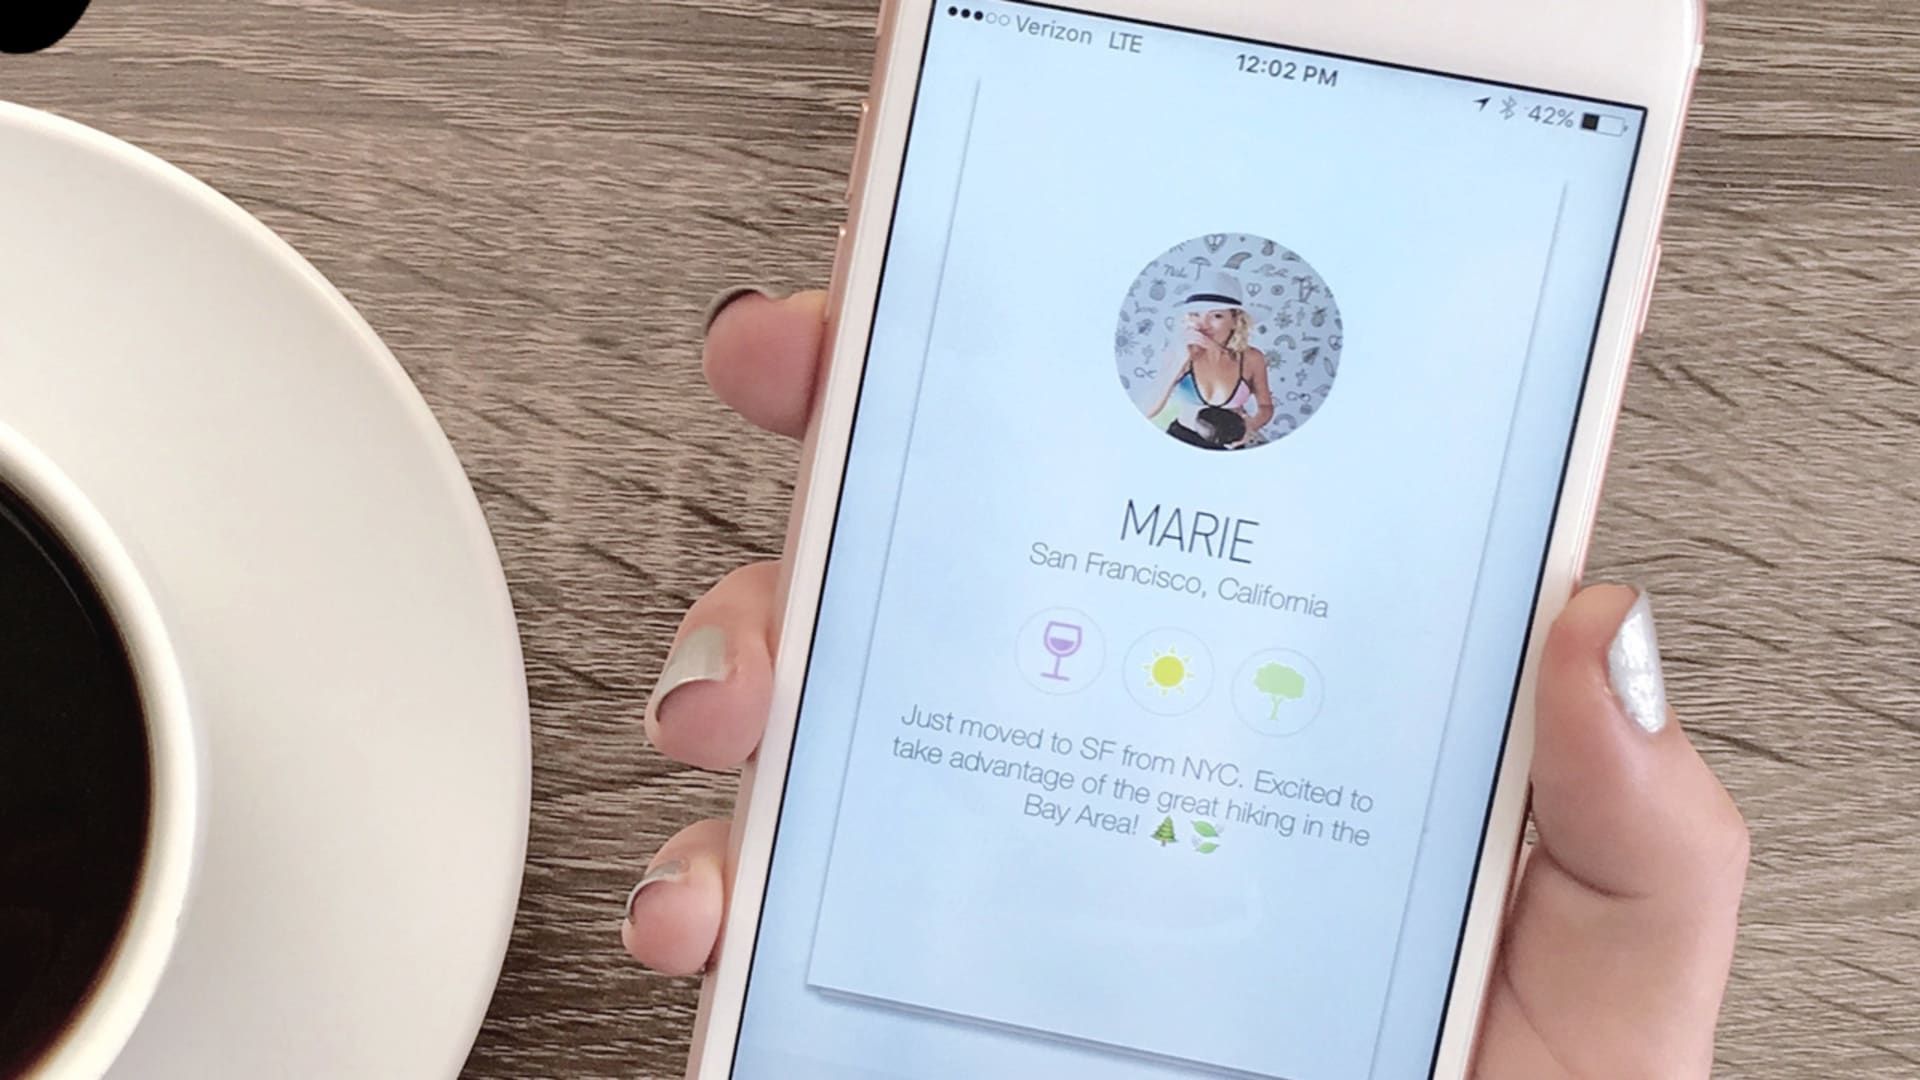 Swipe Right For Friendship With This New Friend-Making App